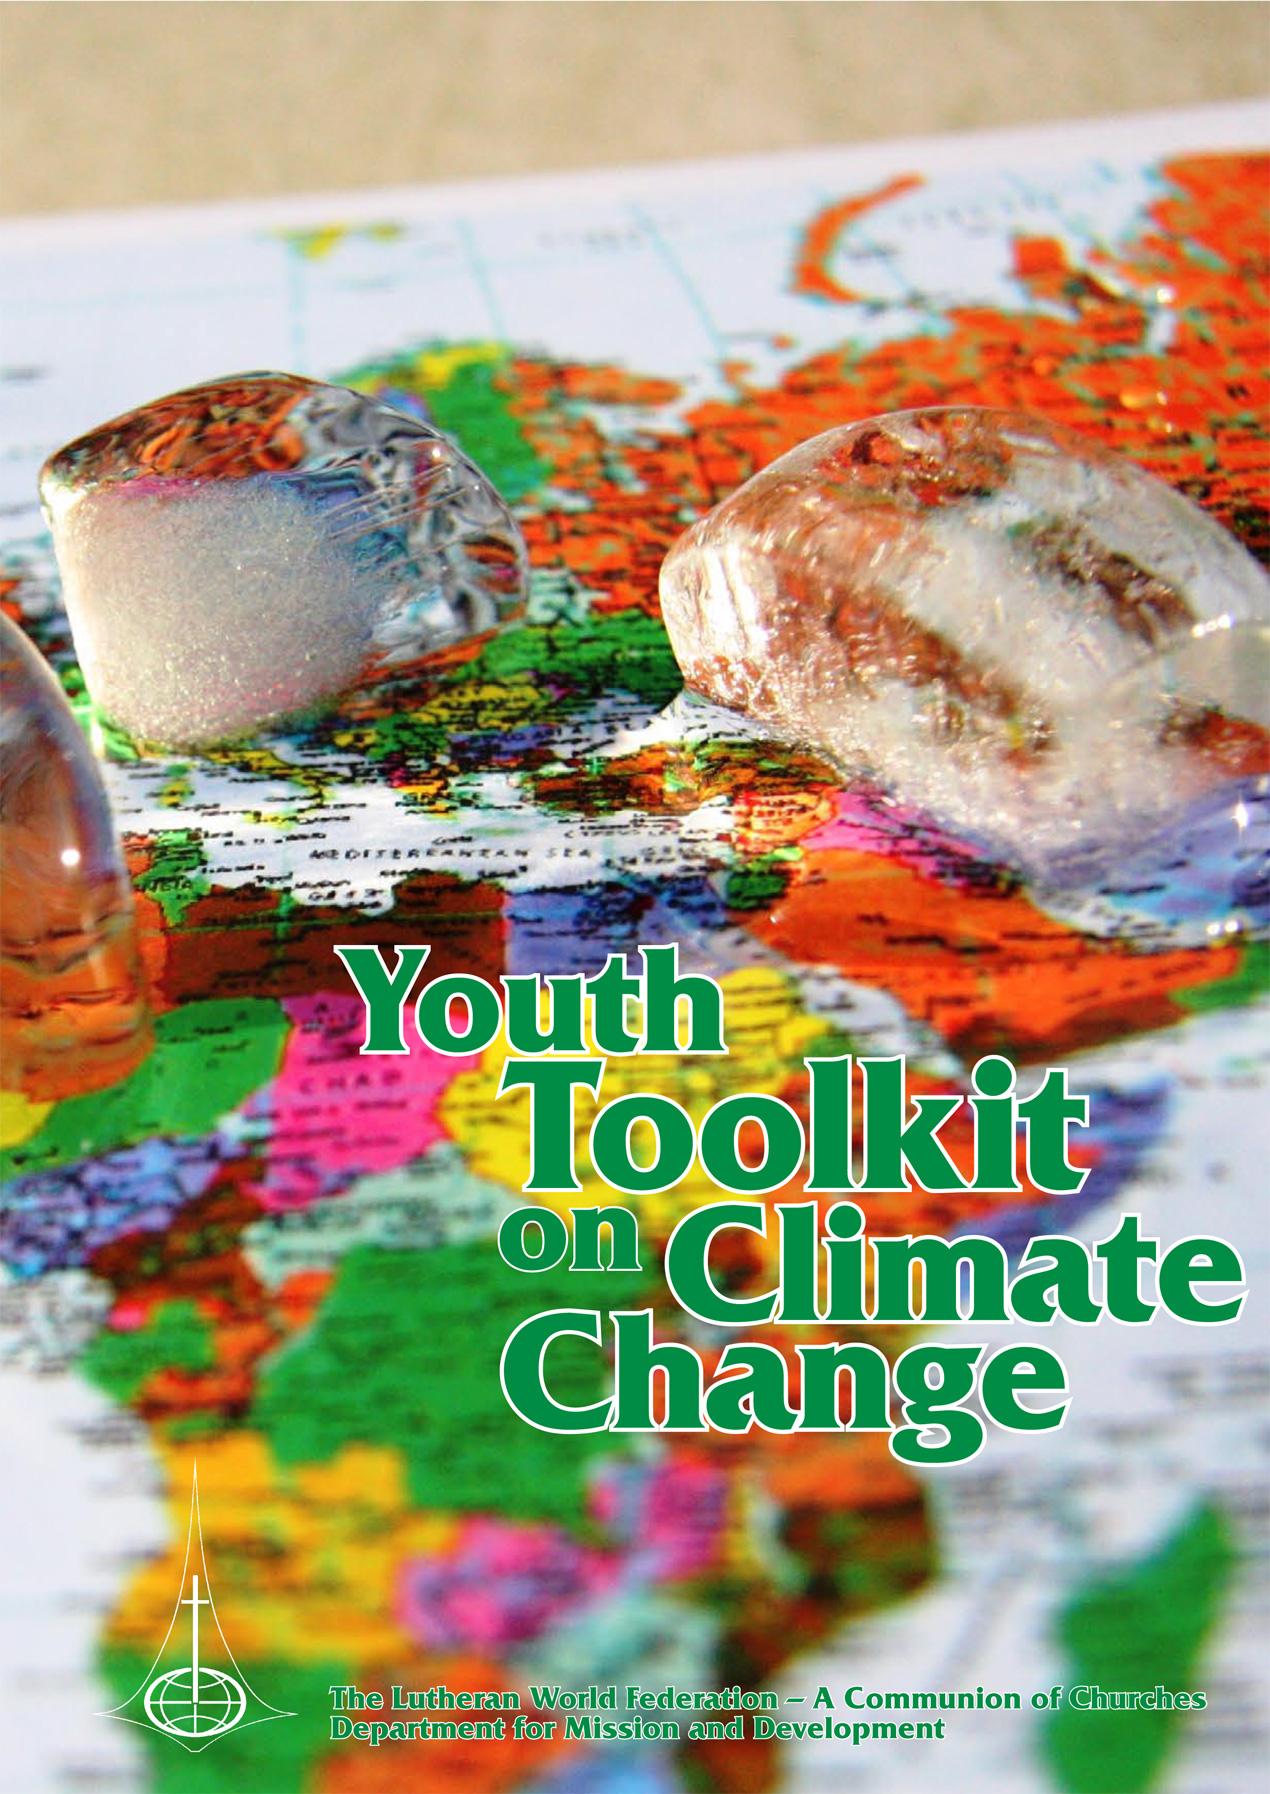 Youth Toolkit on Climate Change